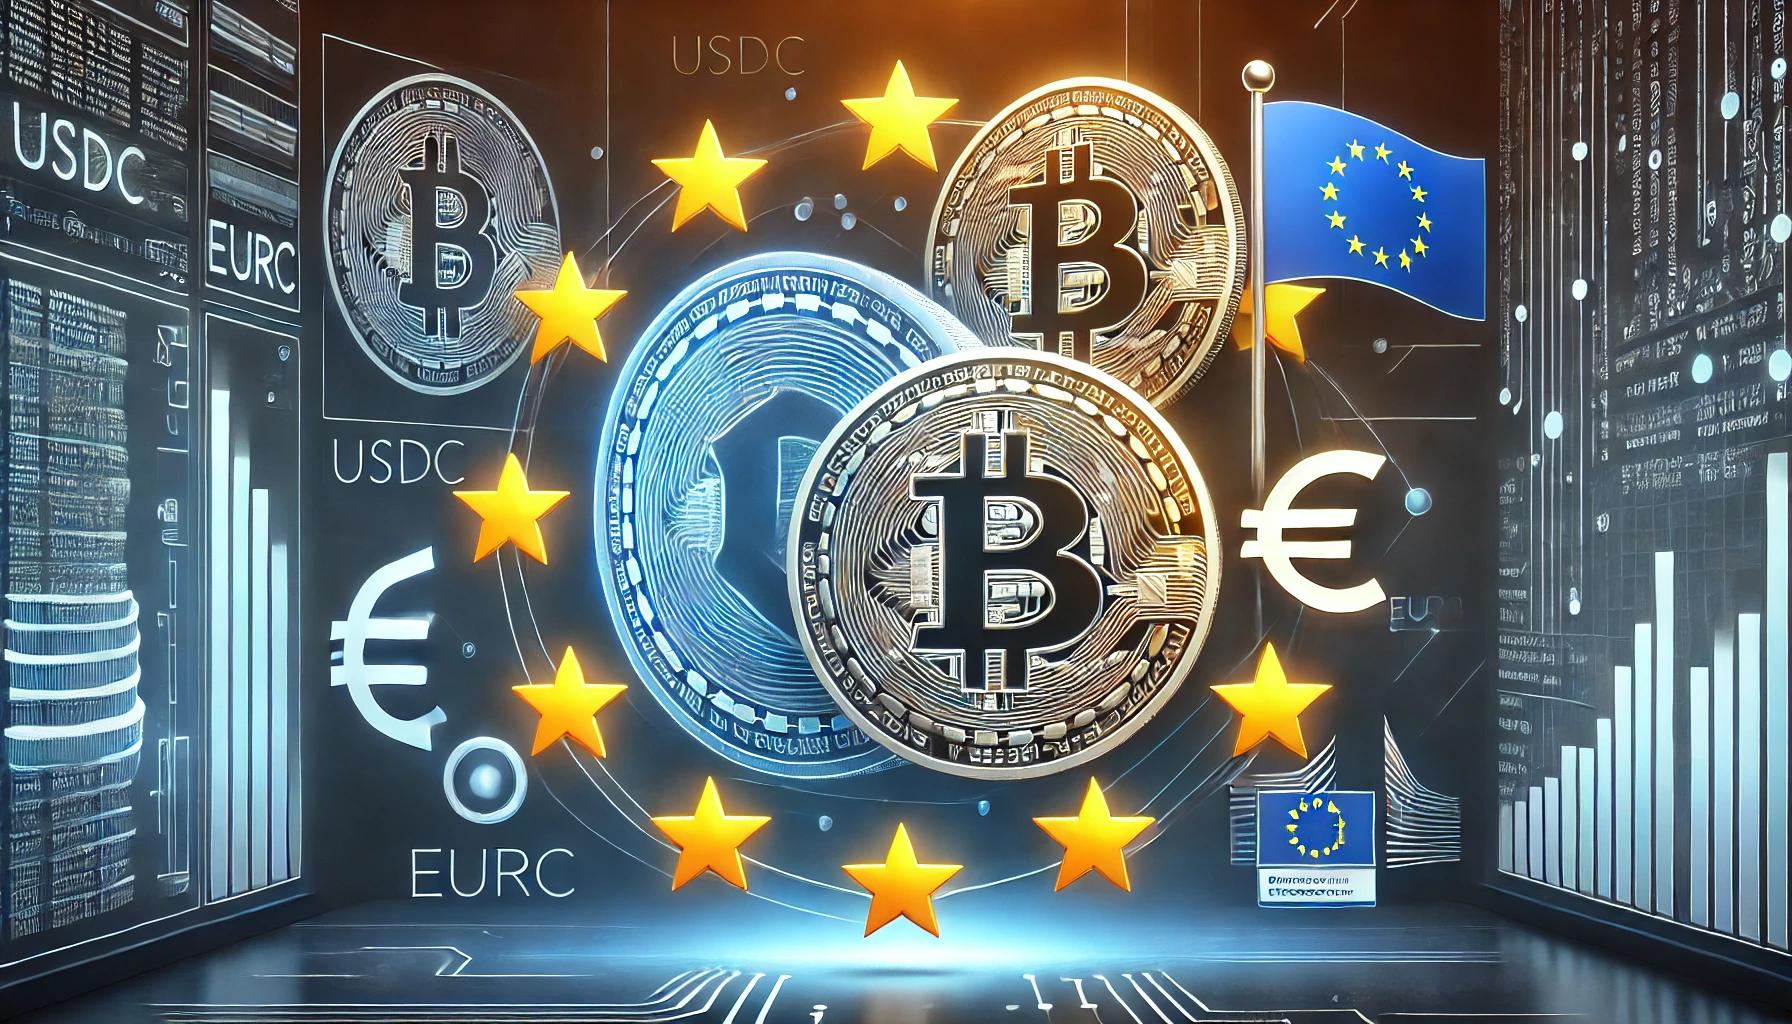 Circle Announces MiCA-Compliant USDC and EURC Stablecoins: A New Era for Digital Currency in Europe